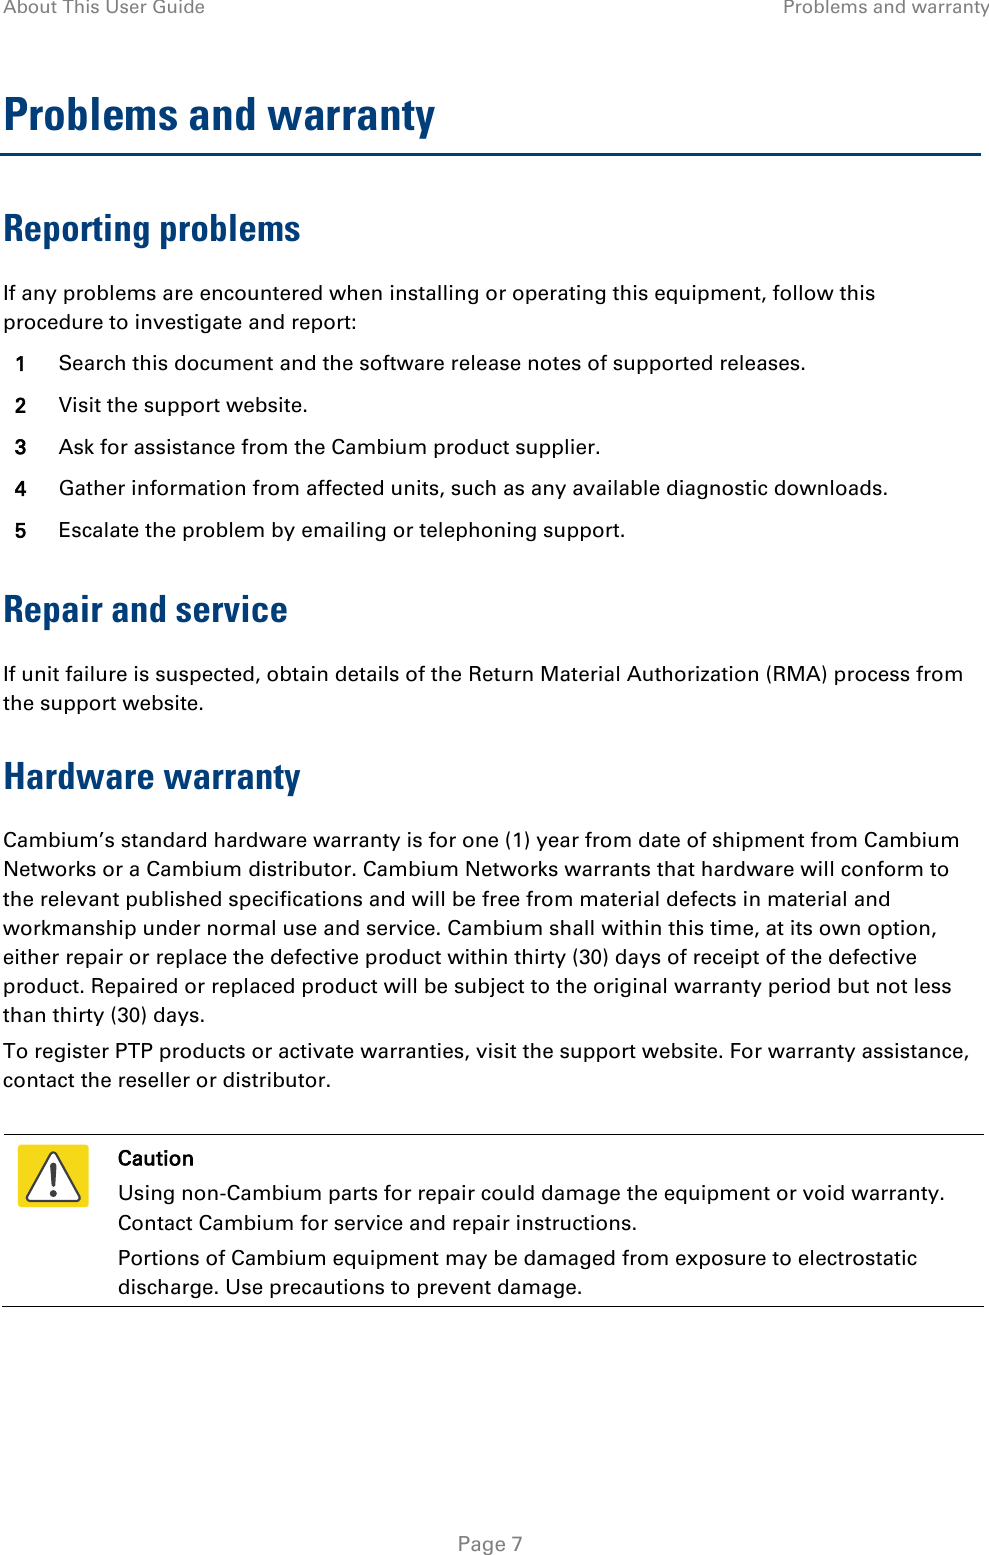 About This User Guide Problems and warranty  Problems and warranty Reporting problems If any problems are encountered when installing or operating this equipment, follow this procedure to investigate and report: 1 Search this document and the software release notes of supported releases. 2 Visit the support website. 3 Ask for assistance from the Cambium product supplier. 4 Gather information from affected units, such as any available diagnostic downloads. 5 Escalate the problem by emailing or telephoning support. Repair and service If unit failure is suspected, obtain details of the Return Material Authorization (RMA) process from the support website. Hardware warranty Cambium’s standard hardware warranty is for one (1) year from date of shipment from Cambium Networks or a Cambium distributor. Cambium Networks warrants that hardware will conform to the relevant published specifications and will be free from material defects in material and workmanship under normal use and service. Cambium shall within this time, at its own option, either repair or replace the defective product within thirty (30) days of receipt of the defective product. Repaired or replaced product will be subject to the original warranty period but not less than thirty (30) days. To register PTP products or activate warranties, visit the support website. For warranty assistance, contact the reseller or distributor.   Caution Using non-Cambium parts for repair could damage the equipment or void warranty. Contact Cambium for service and repair instructions. Portions of Cambium equipment may be damaged from exposure to electrostatic discharge. Use precautions to prevent damage.   Page 7 